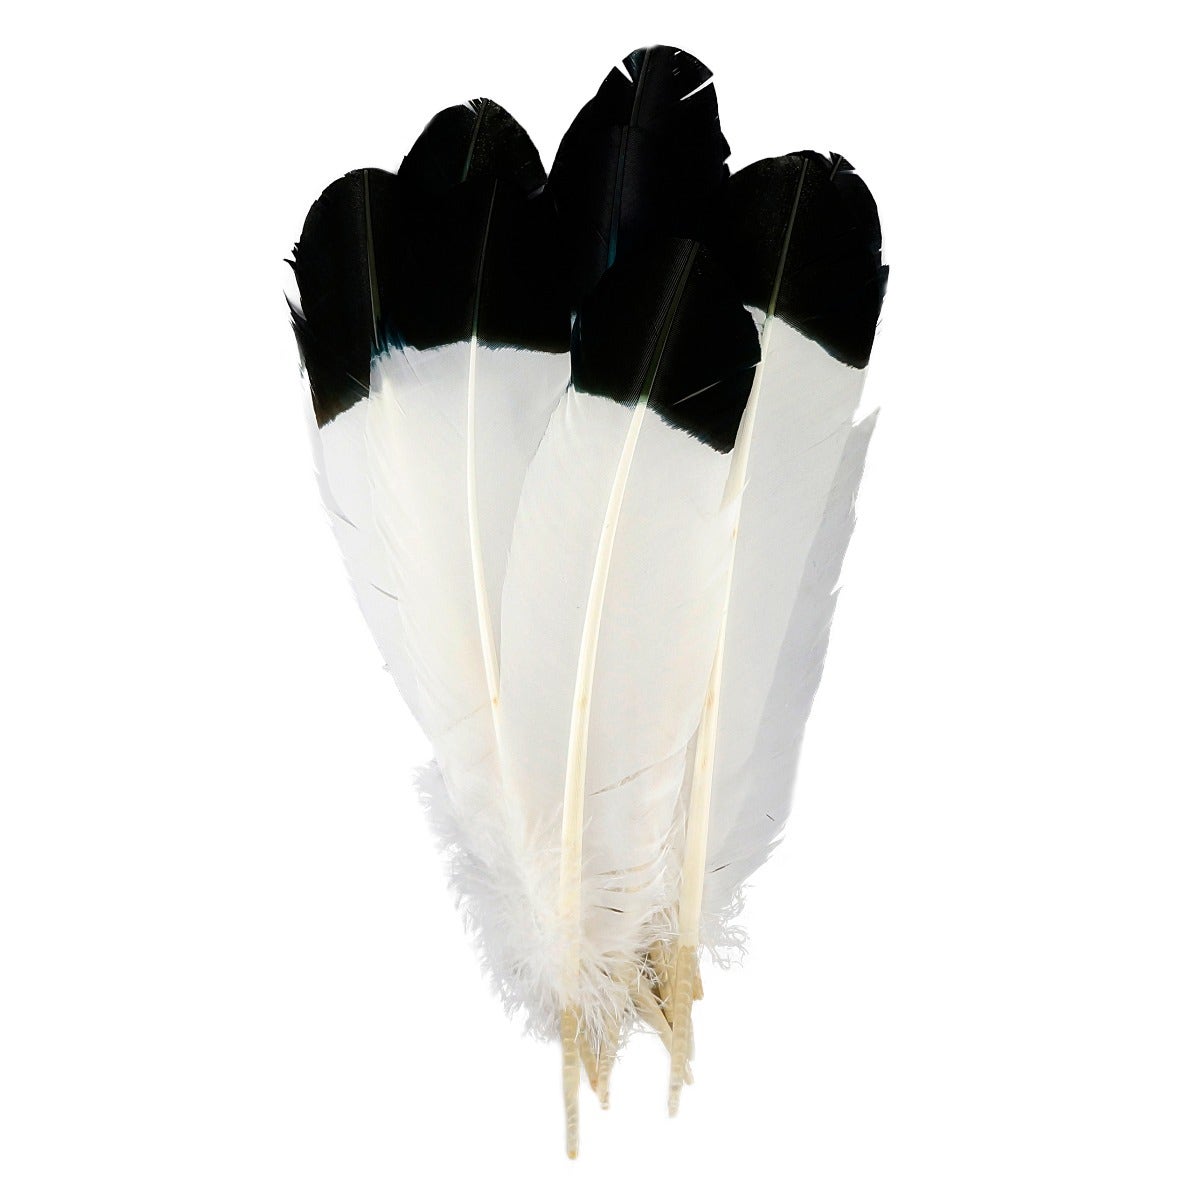 Immitation Eagle Feathers, Pkg of 4, White Feathers, Black and White Big  Feathers, Turkey Quill Feather 